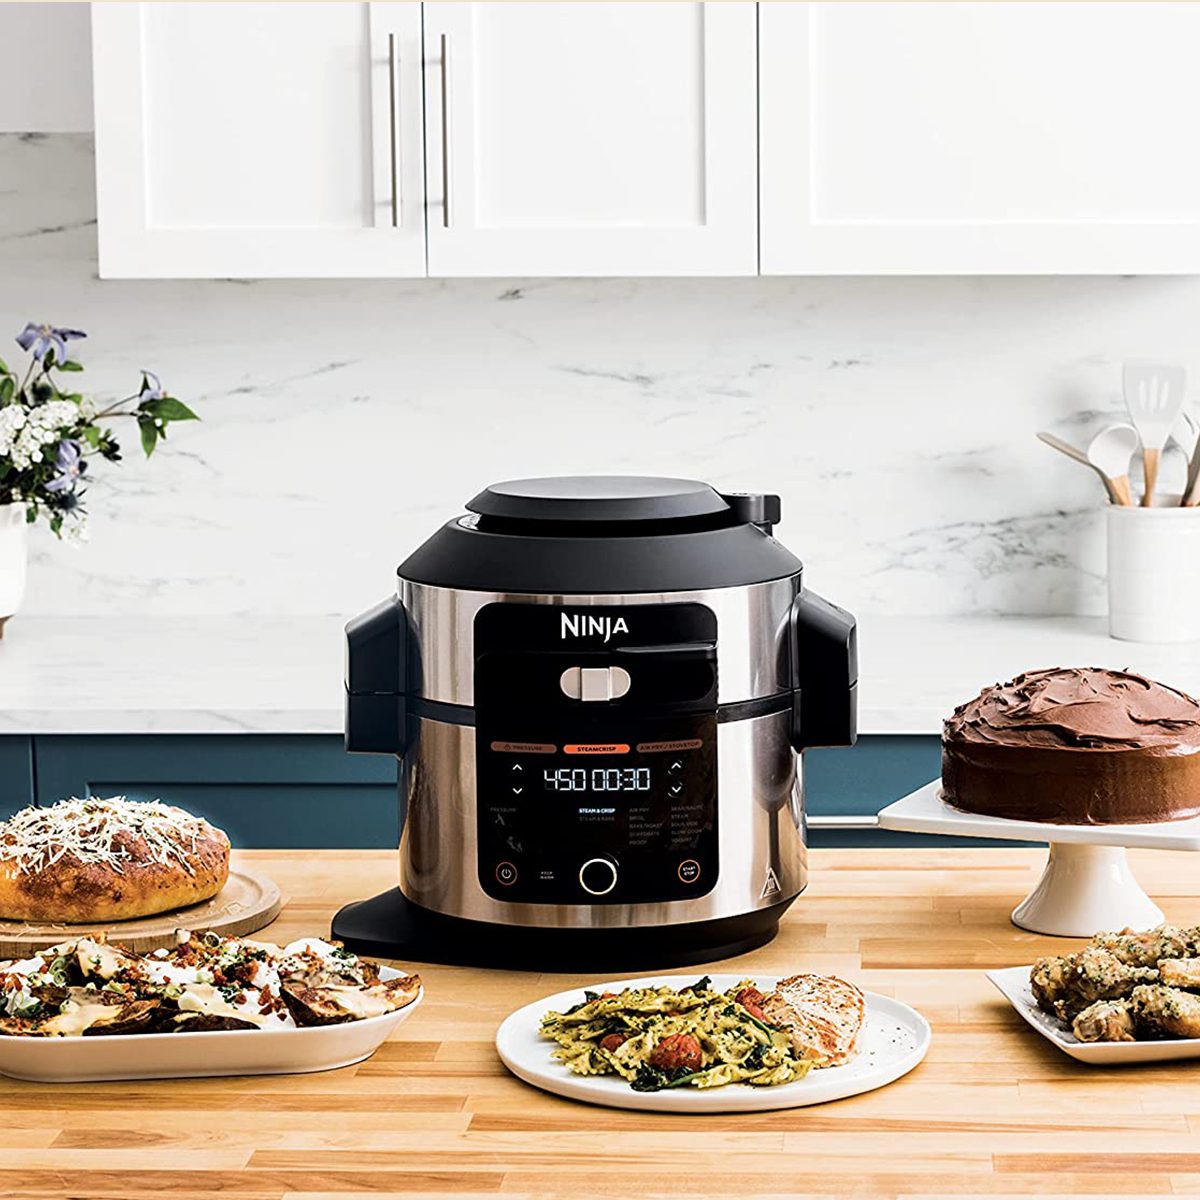 https://www.tasteofhome.com/wp-content/uploads/2022/11/Shop-the-Best-Air-Fryer-Deals-for-Summer-and-Say-Goodbye-to-a-Toasty-Kitchen_FT_via-amazon.com_-1.jpg?fit=700%2C1024